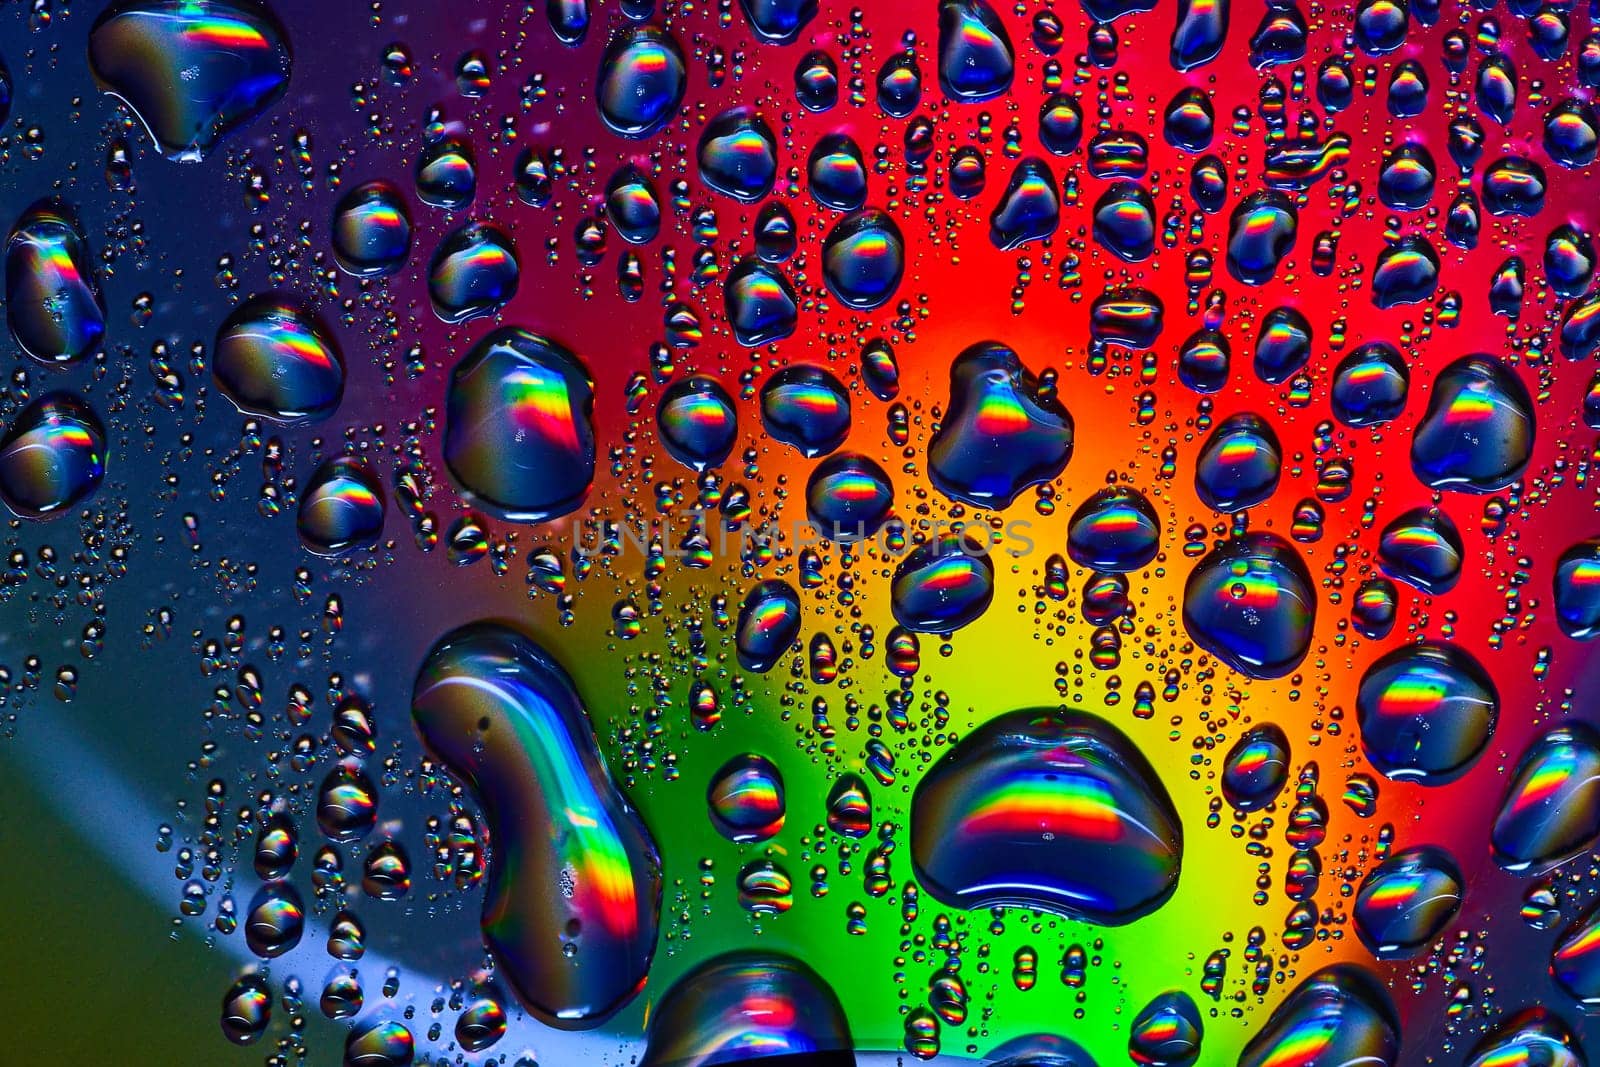 Image of Fizzy odd shaped bubbles bursting across rainbow colored metallic surface background asset